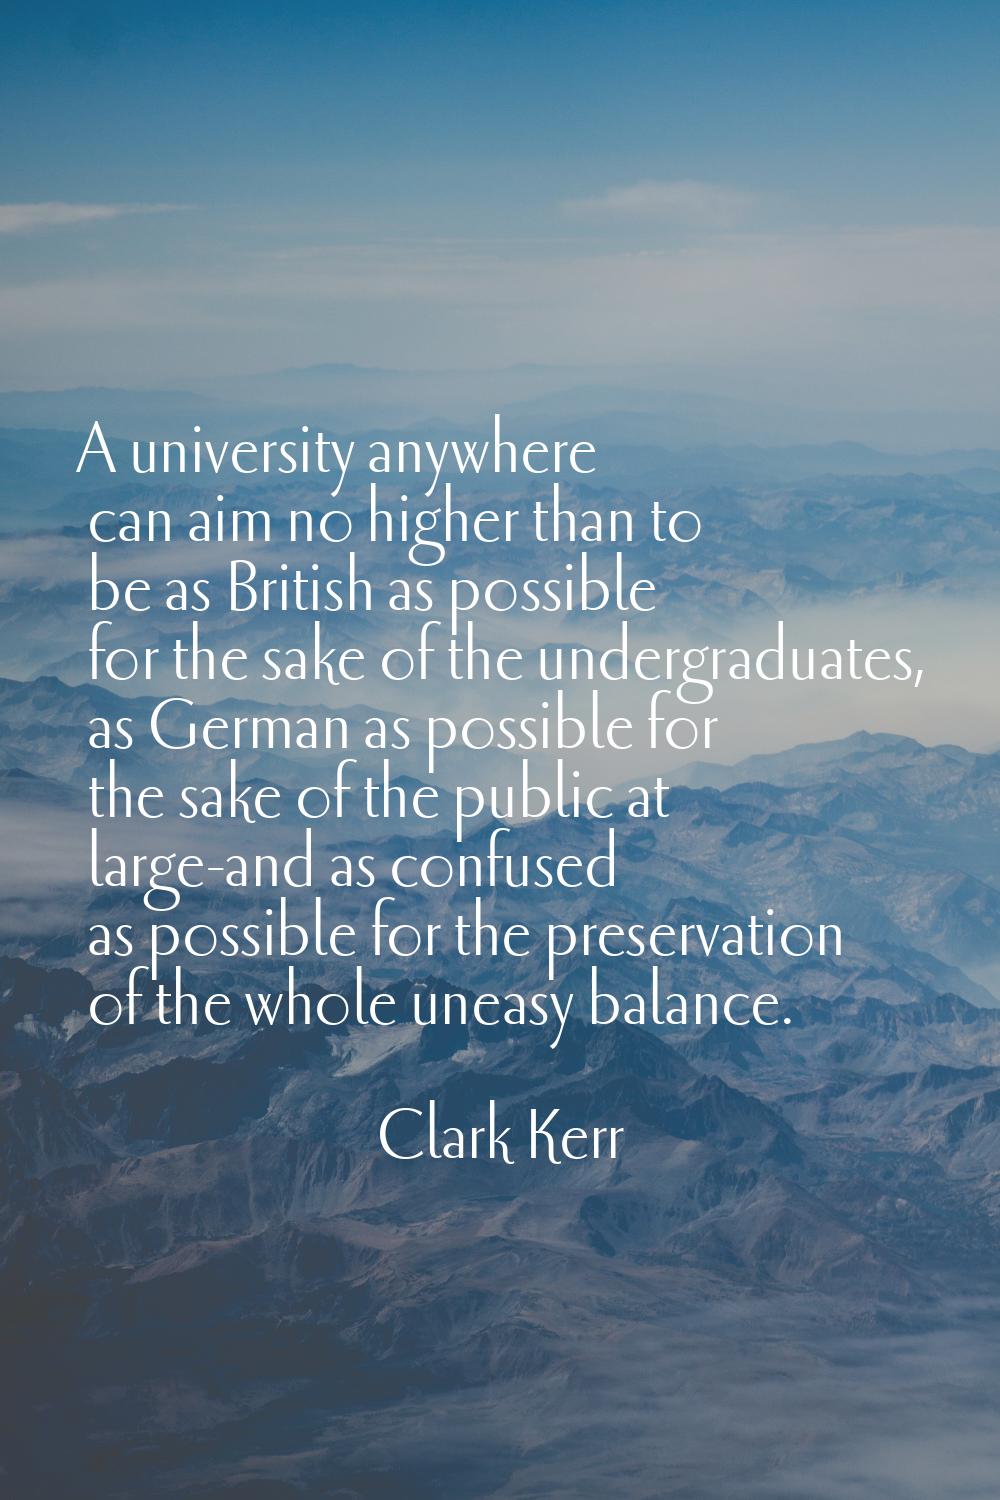 A university anywhere can aim no higher than to be as British as possible for the sake of the under